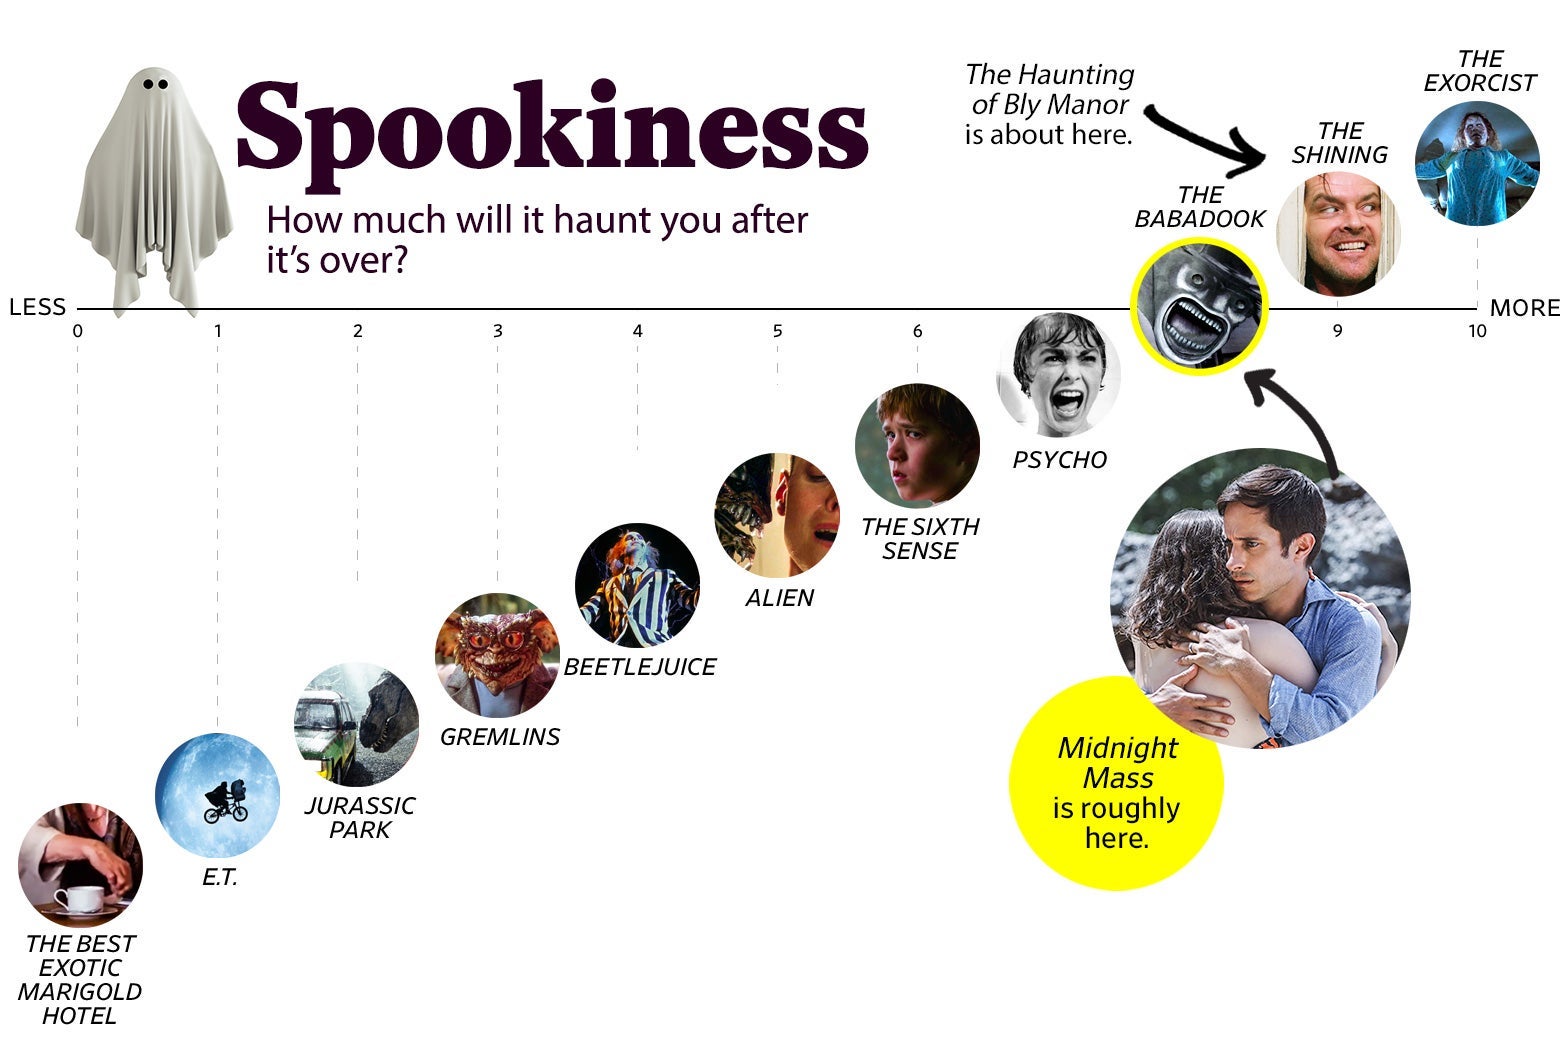 A chart titled “Spookiness: How much will it haunt you after the movie is over?” shows that Midnight Mass ranks an 8 in spookiness, roughtly the same as The Babadook. Bly Manor ranked a 9, roughly the same as The Shining. The scale ranges from The Best Exotic Marigold Hotel (0) to The Exorcist (10).